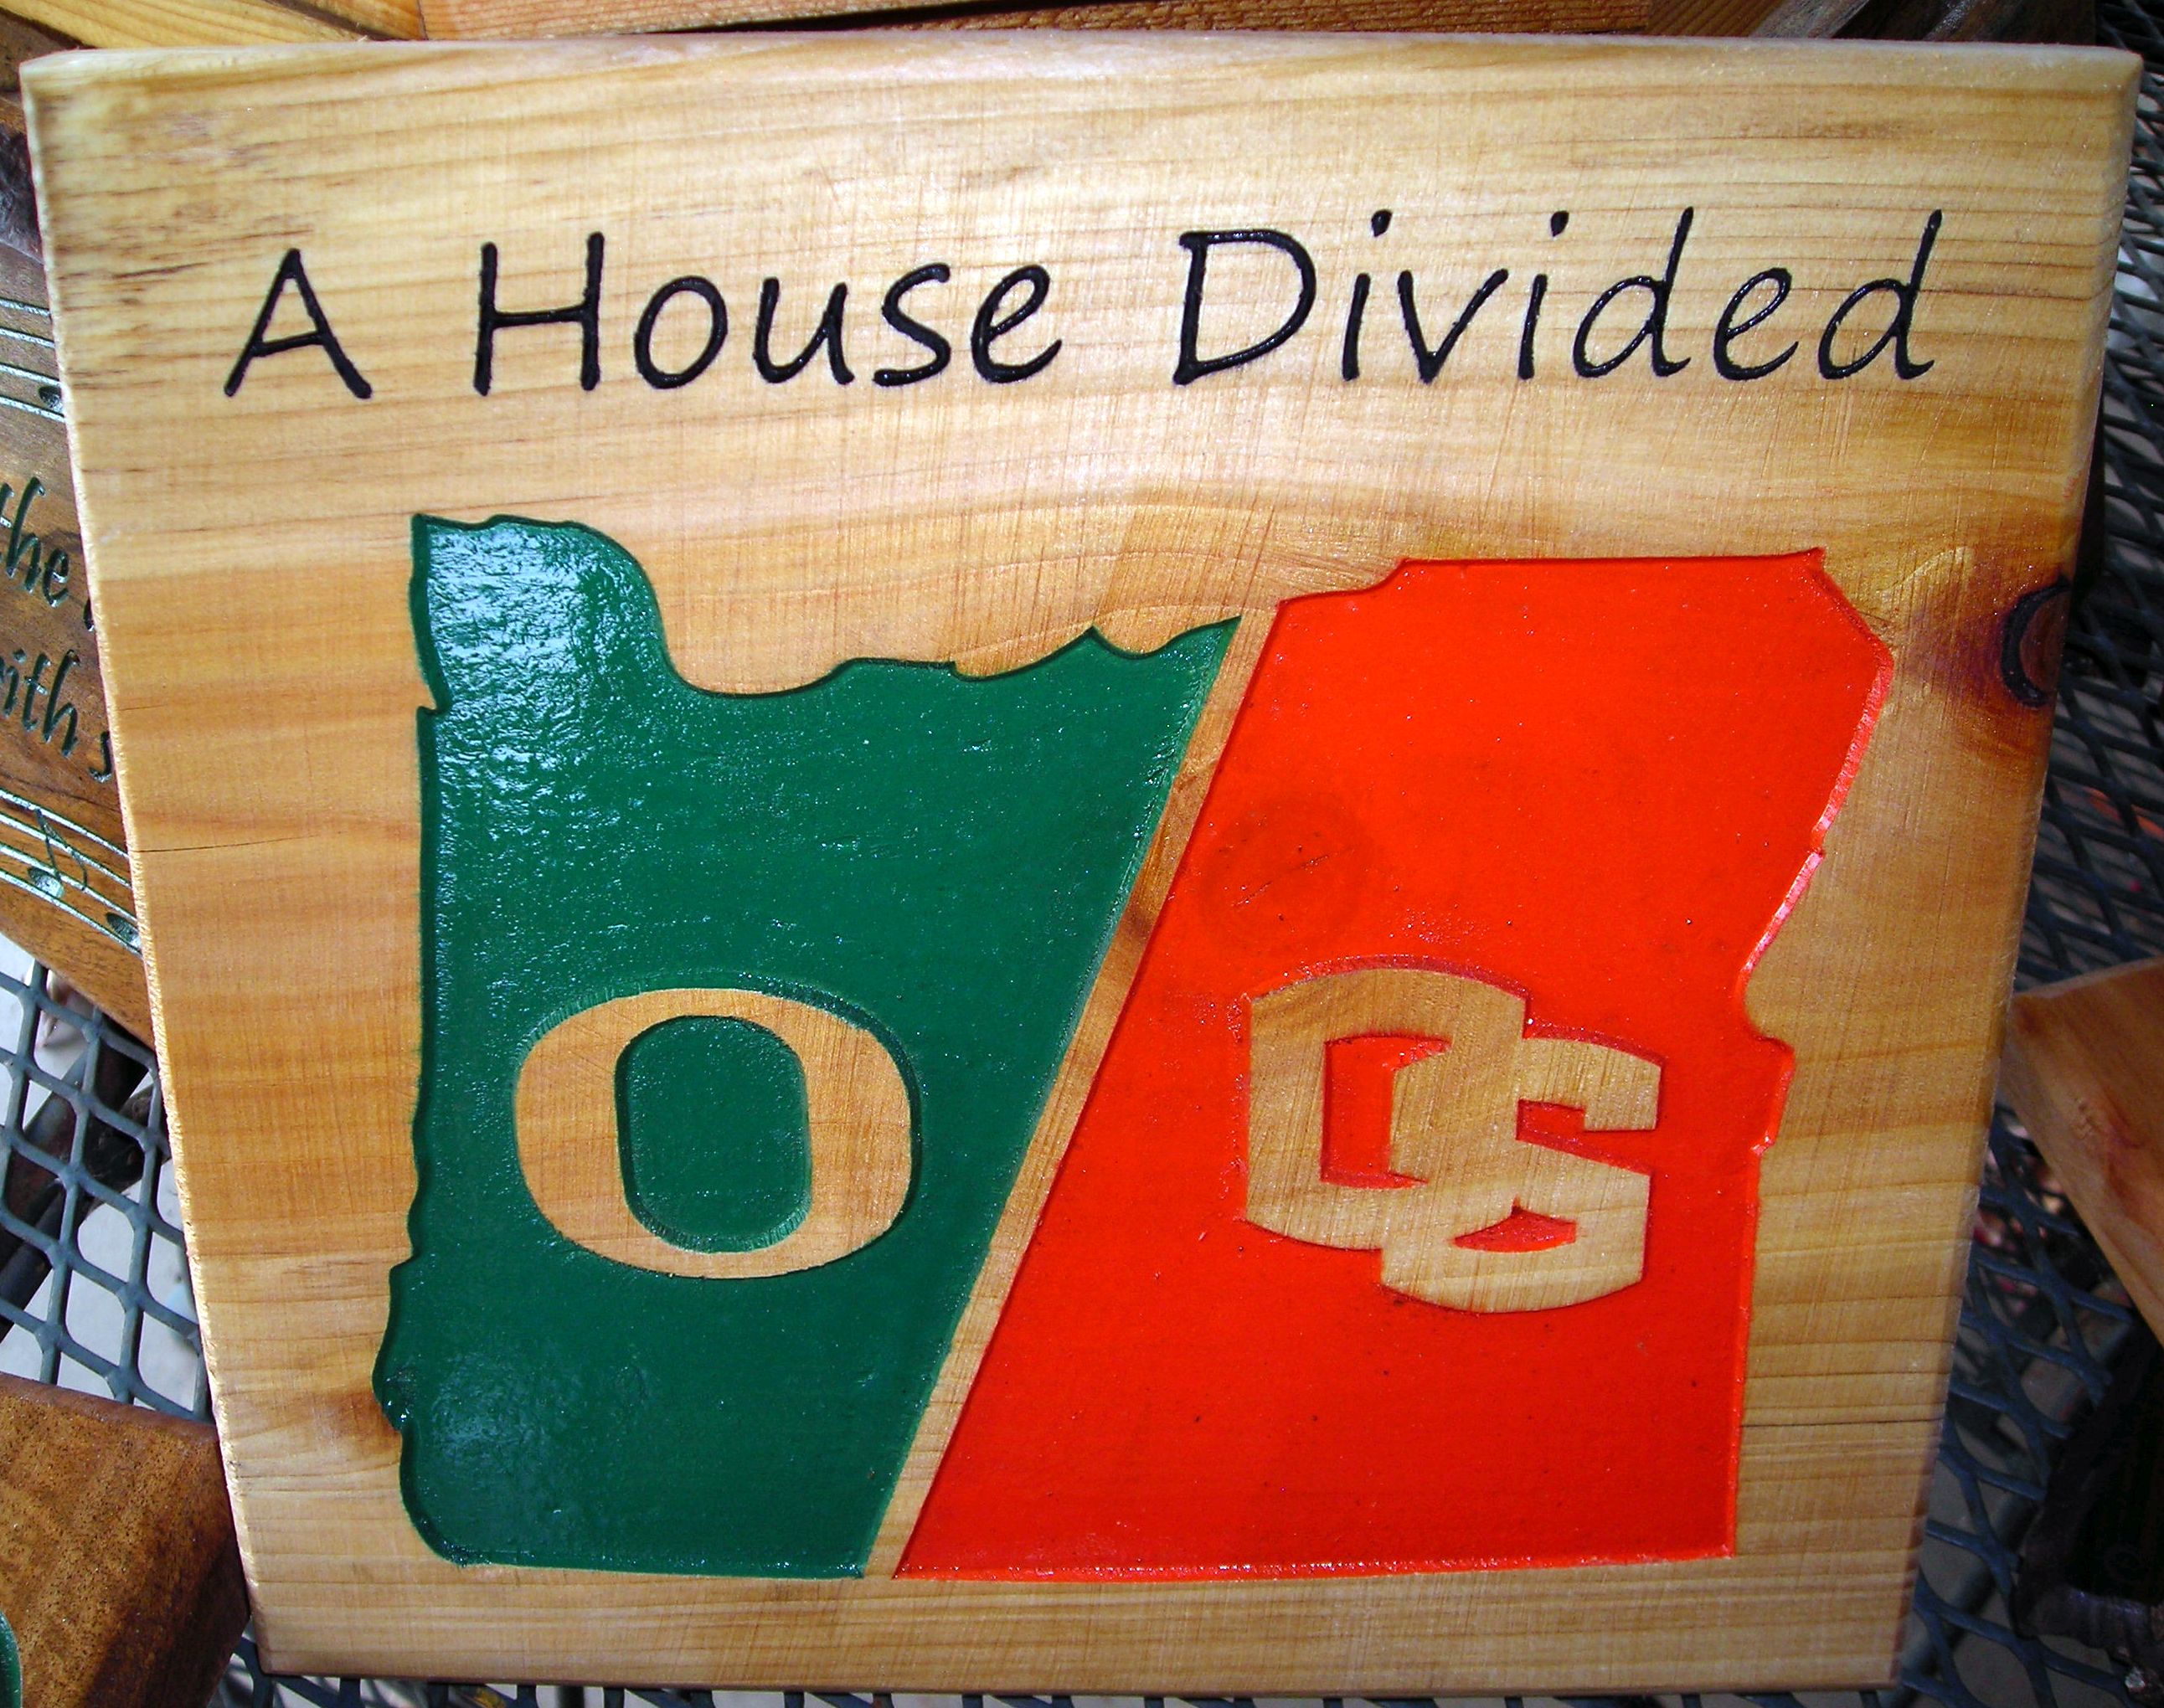 House_divided2